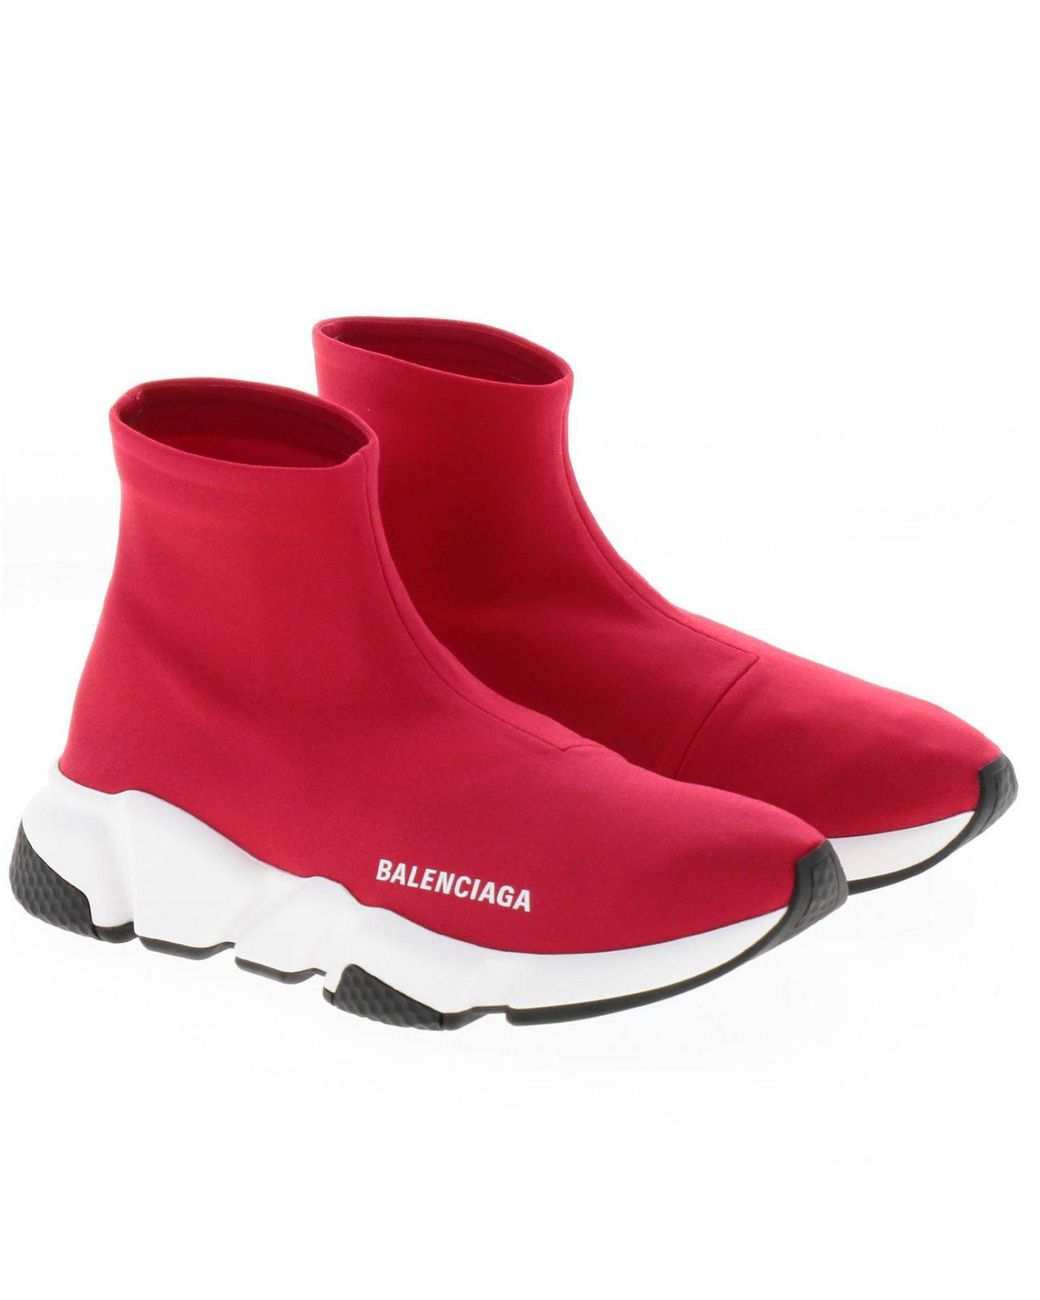 Balenciaga Sneakers Shoes Women in Red | Lyst